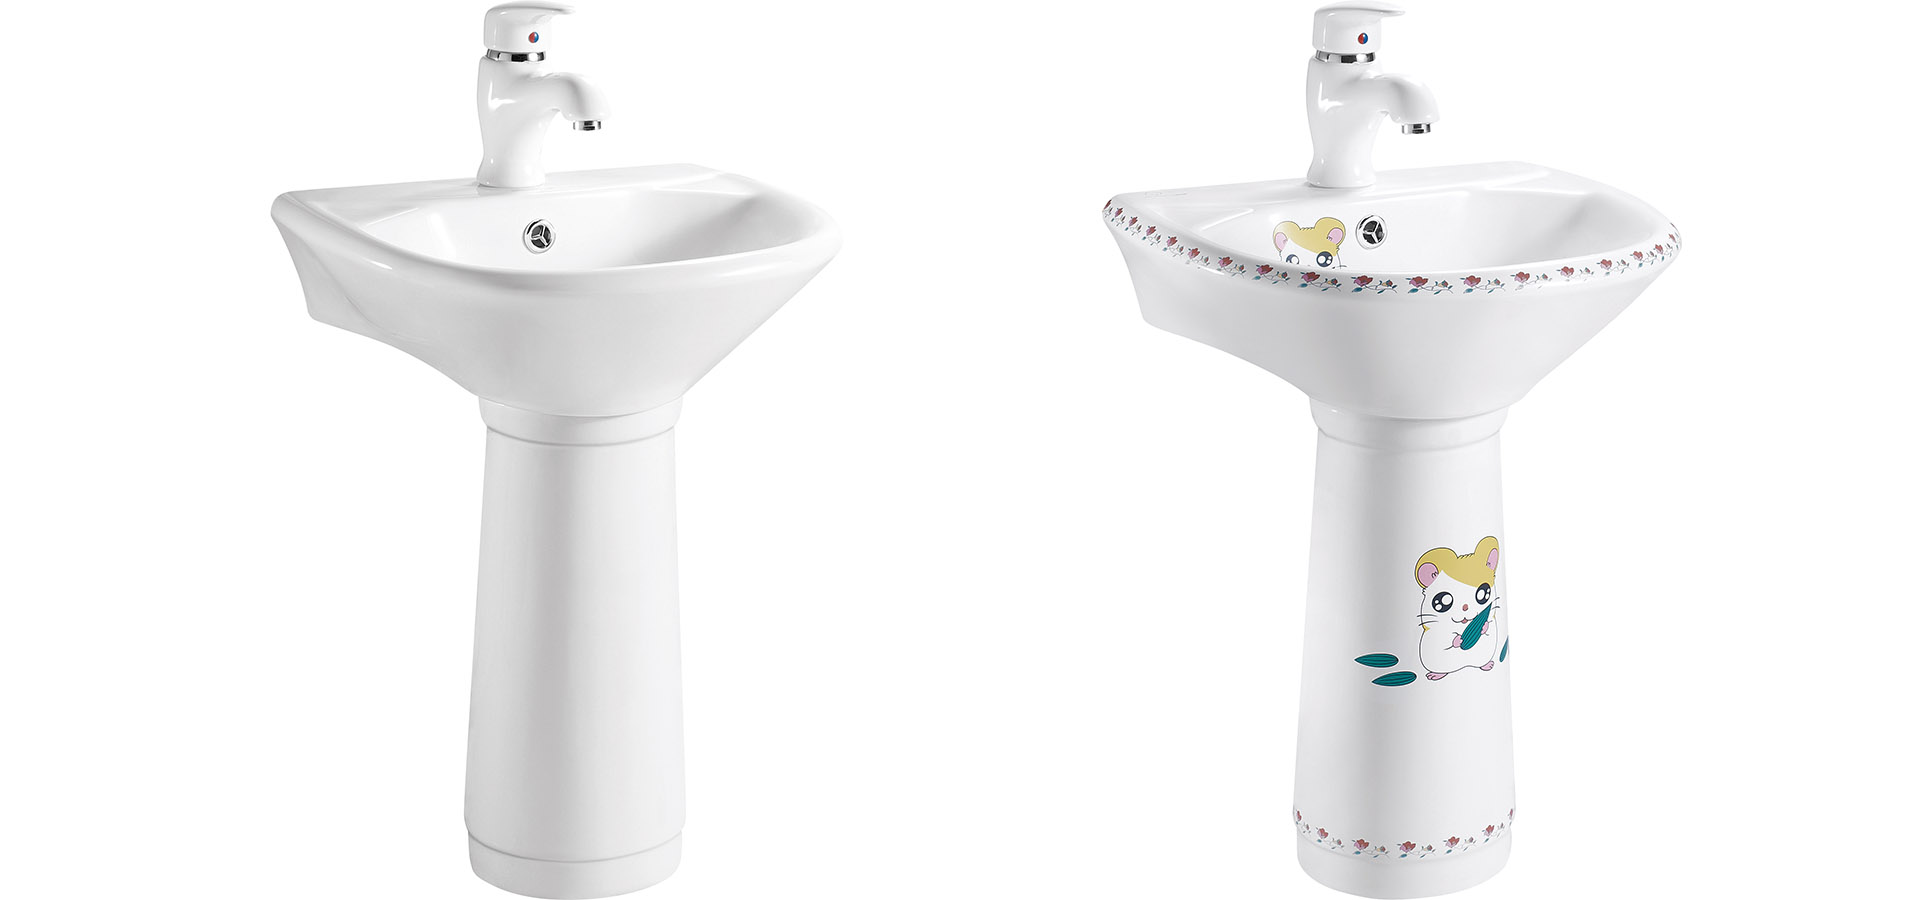 professional child urinal manufacturer in china, Waxiang ceramics